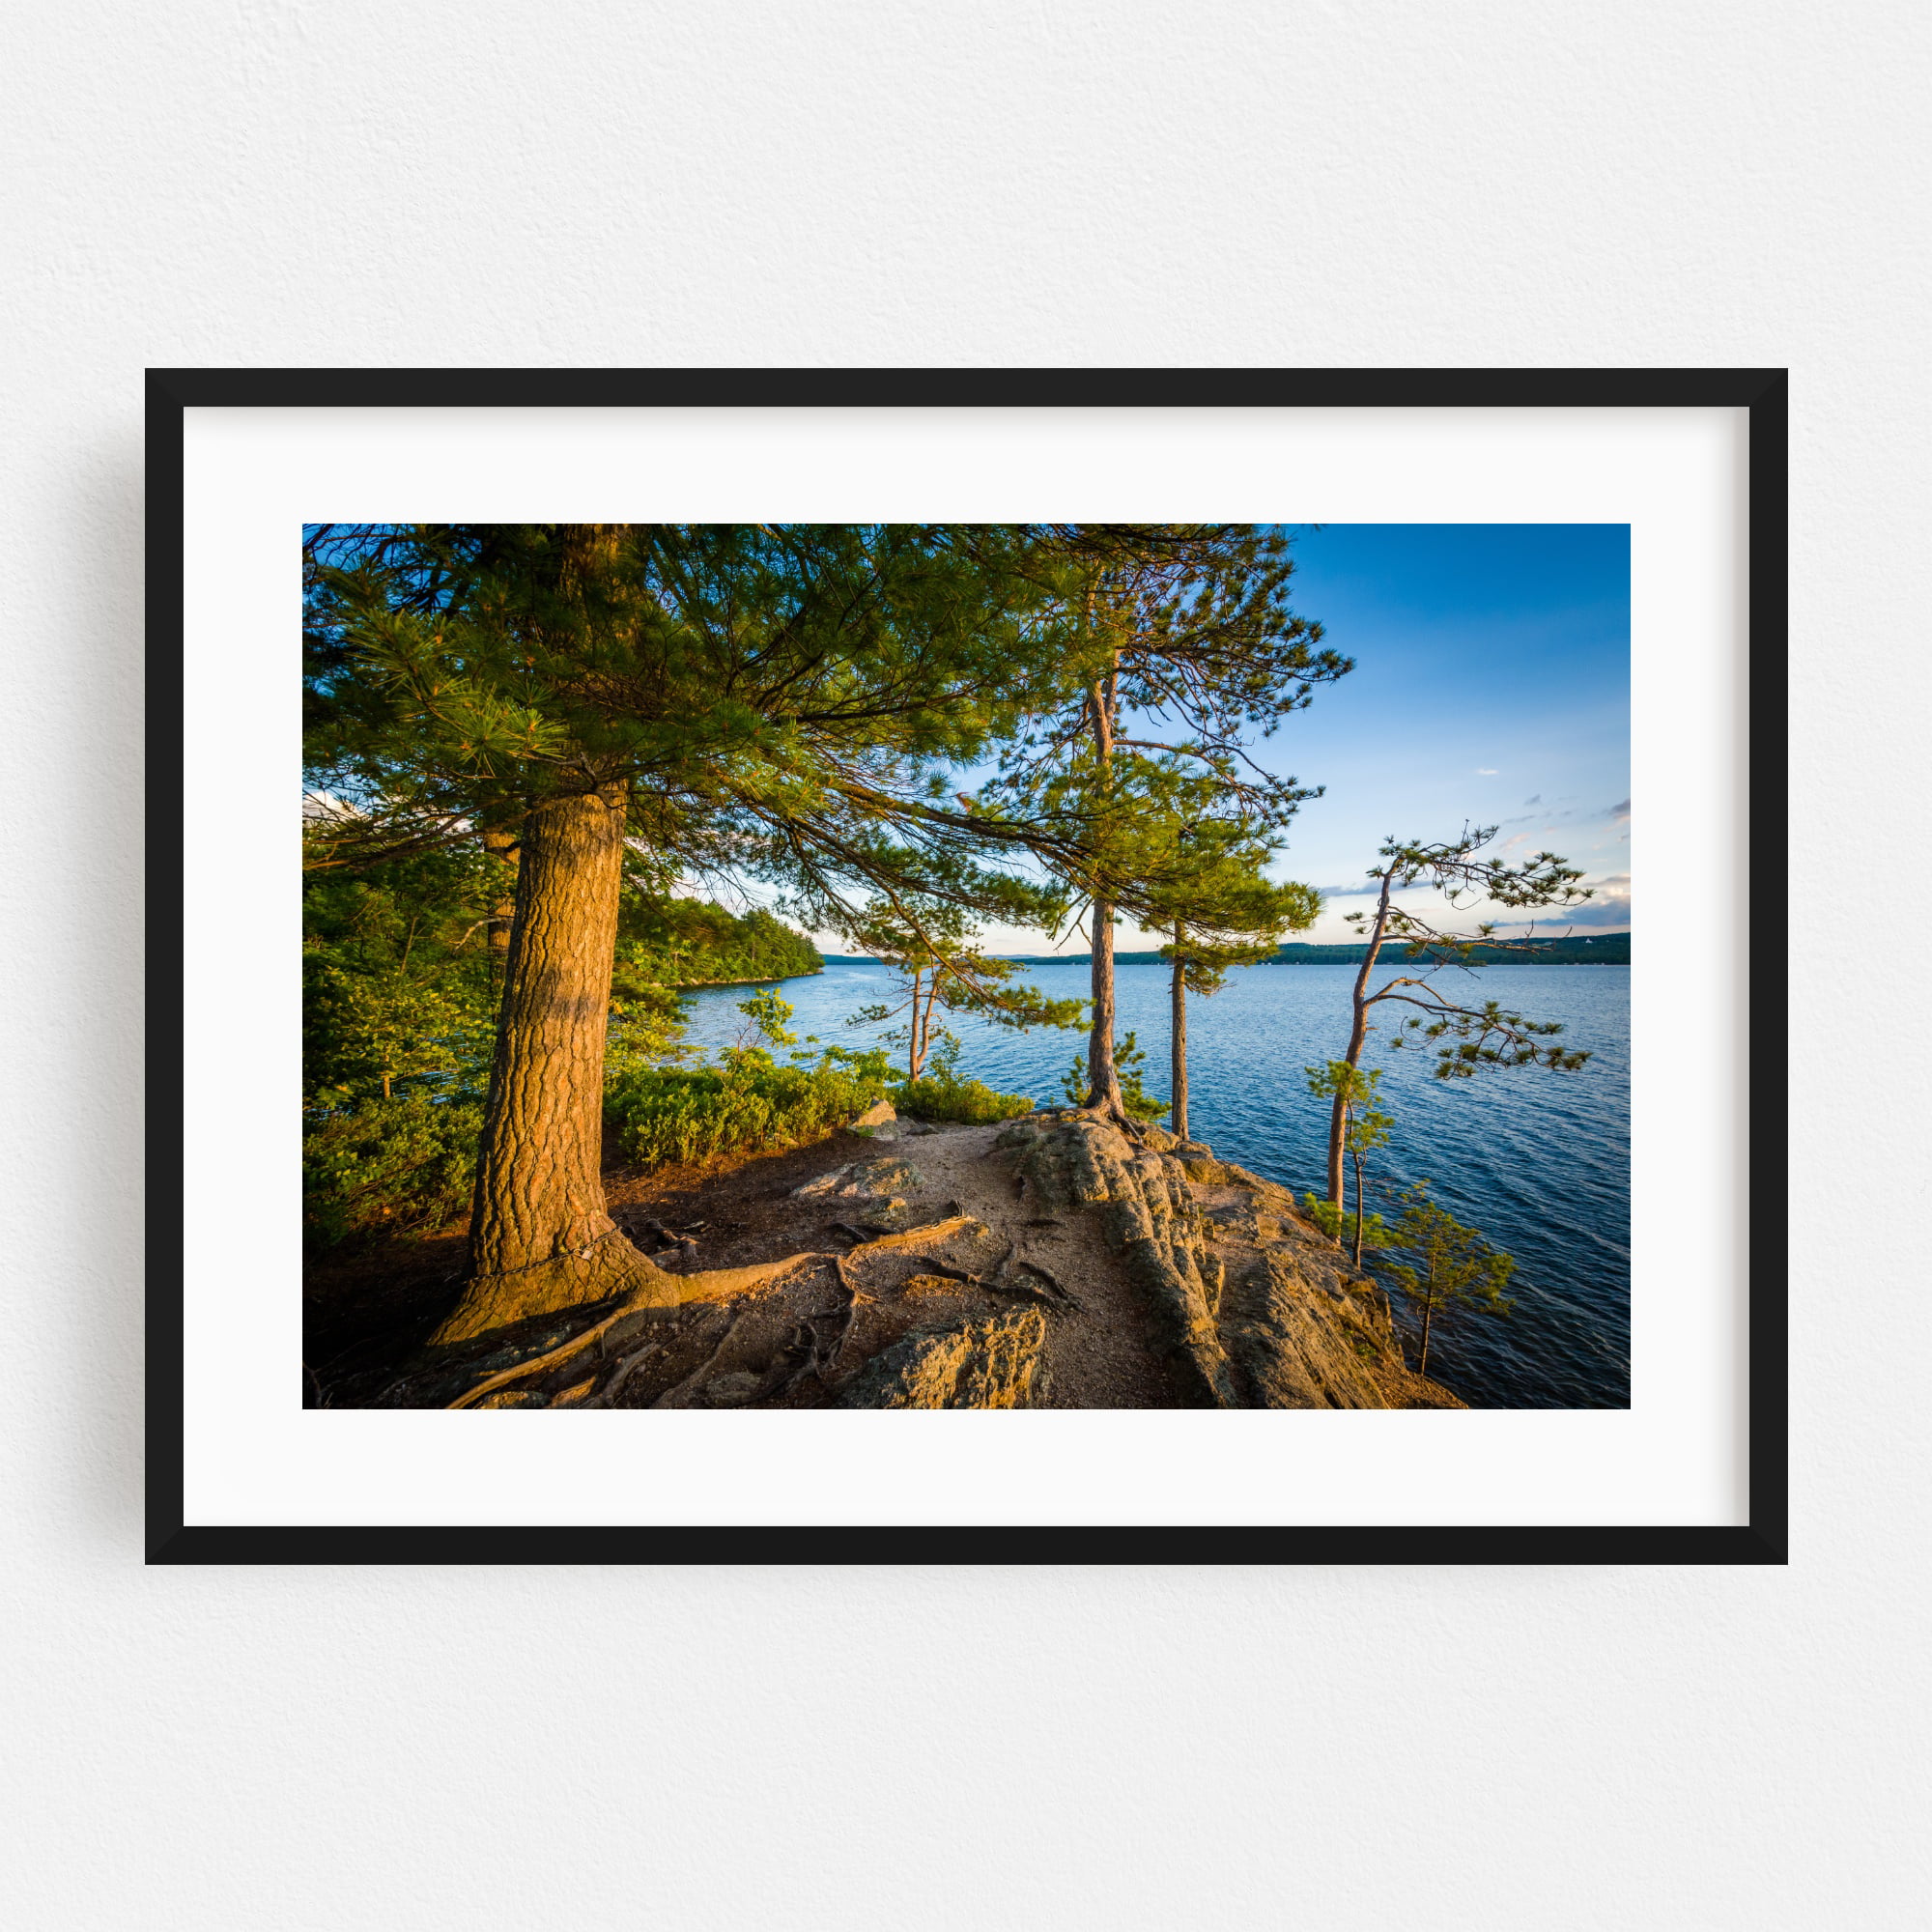 Mountains Poster New Hampshire Poster Mountains Wall Art Mountains Print Lakes Rivers Canals Nature Print New Hampshire Print